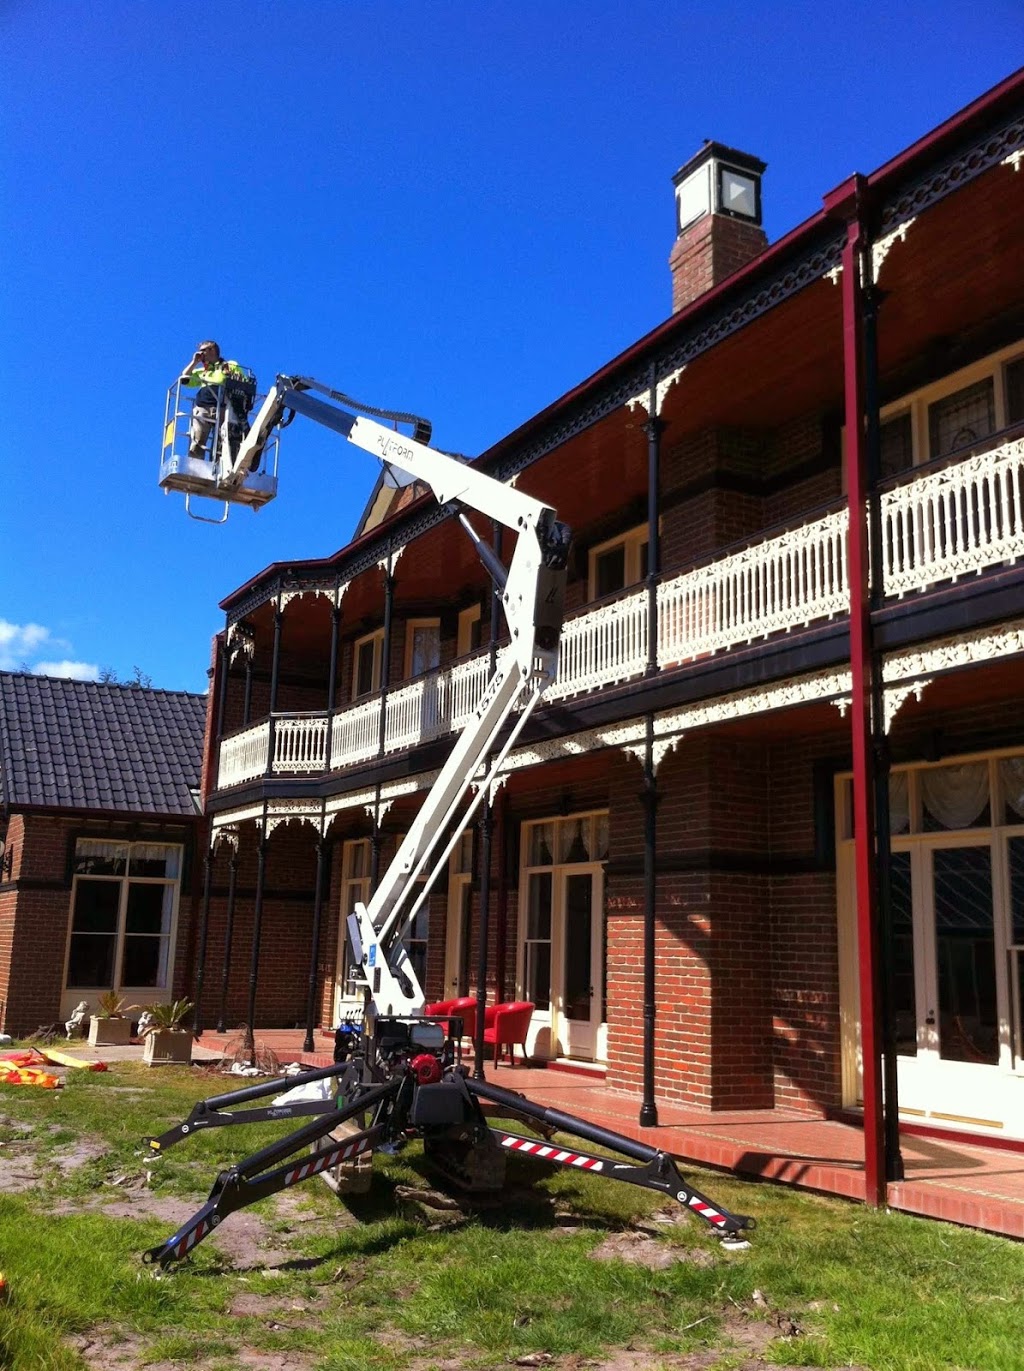 Spider Lift Hire, Difficult Access | 16 Russell St, Nunawading VIC 3131, Australia | Phone: 1300 522 399